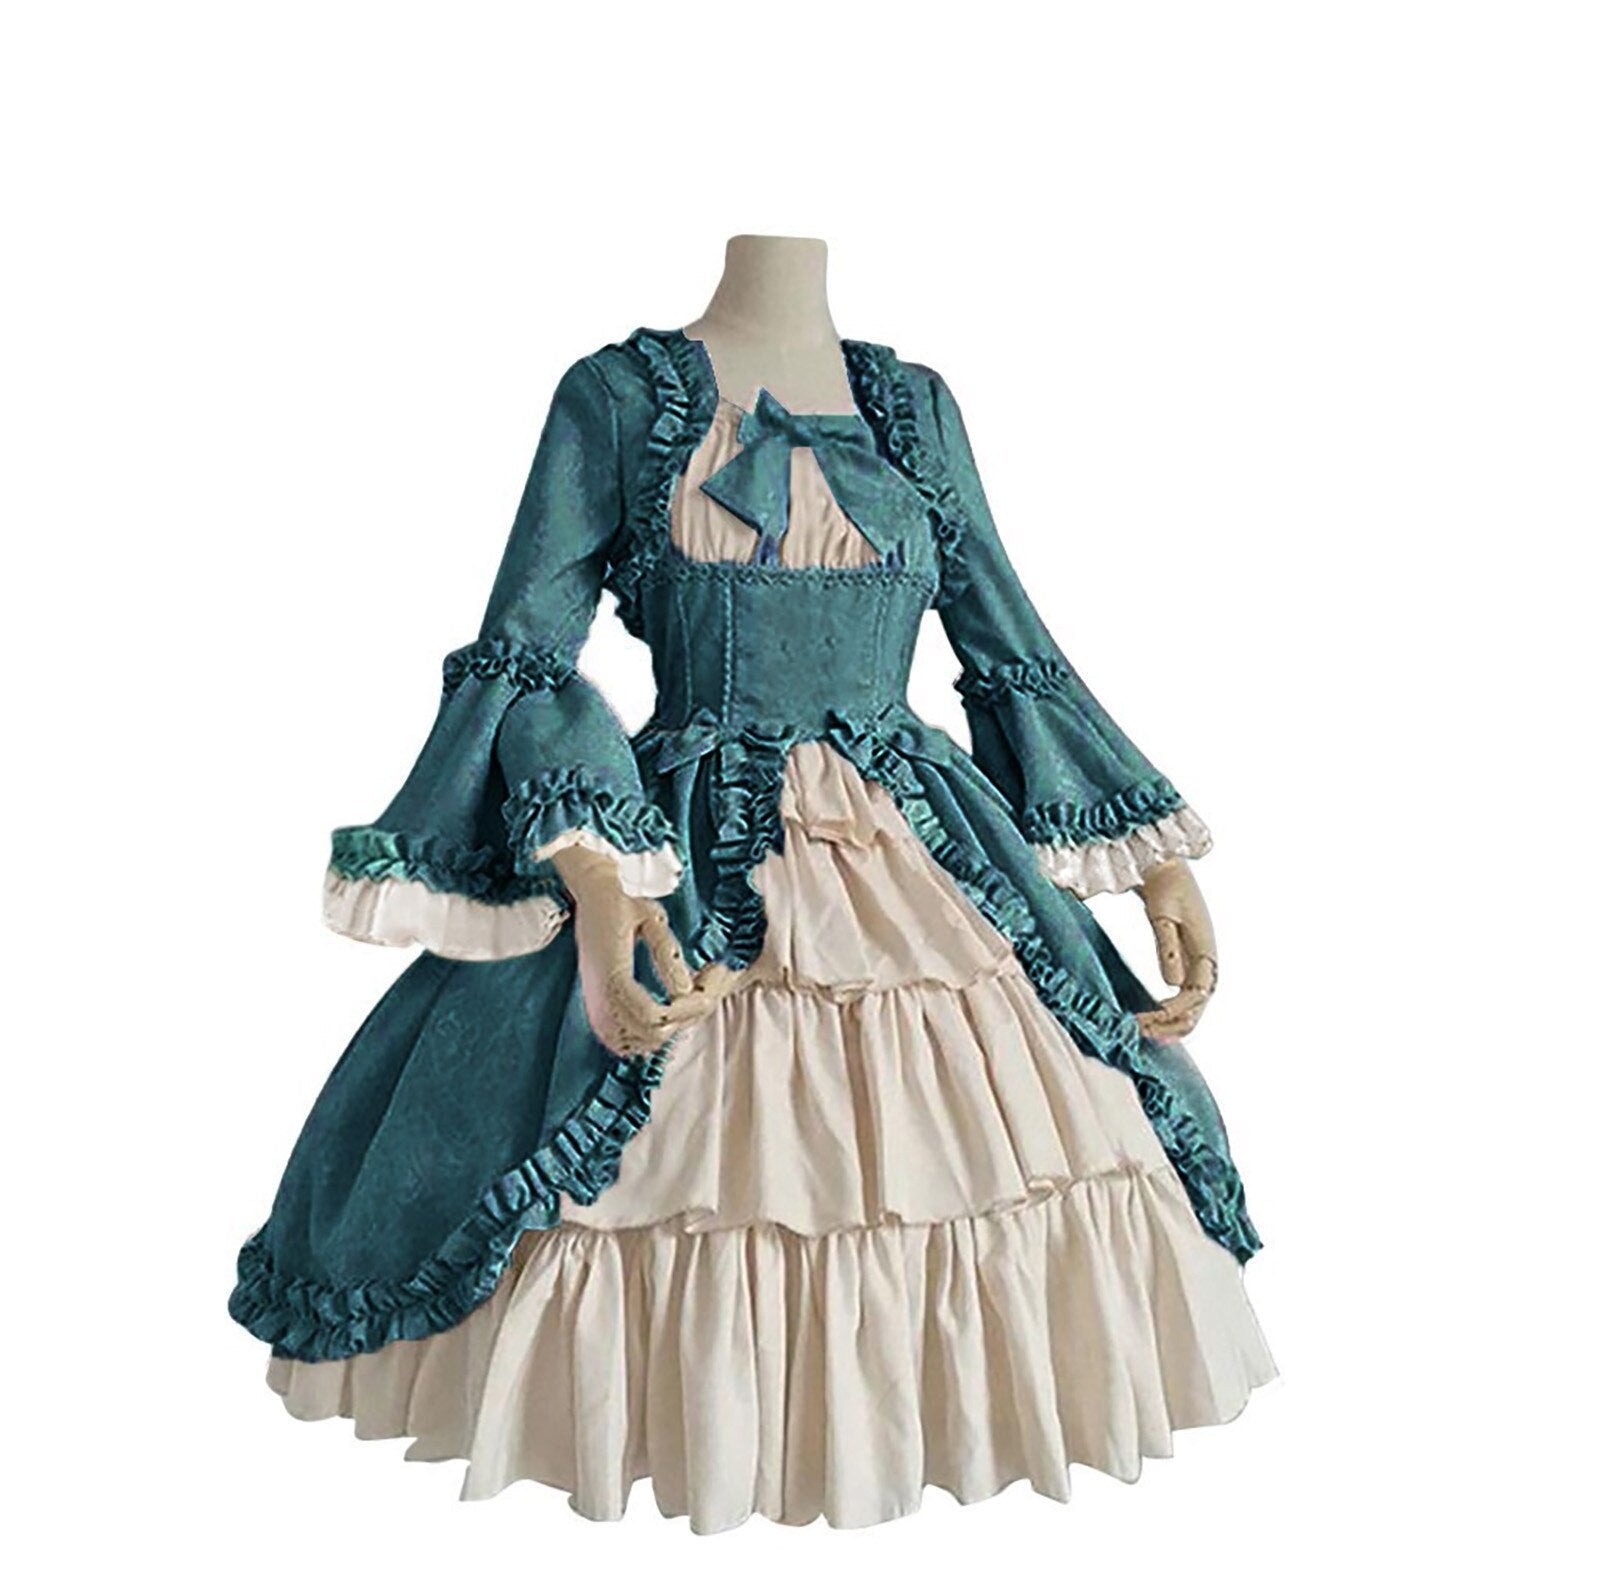 Medieval Court Gothic Lolita Dress with Square Neck - Blue / S / China - All Dresses - Dresses - 8 - 2024